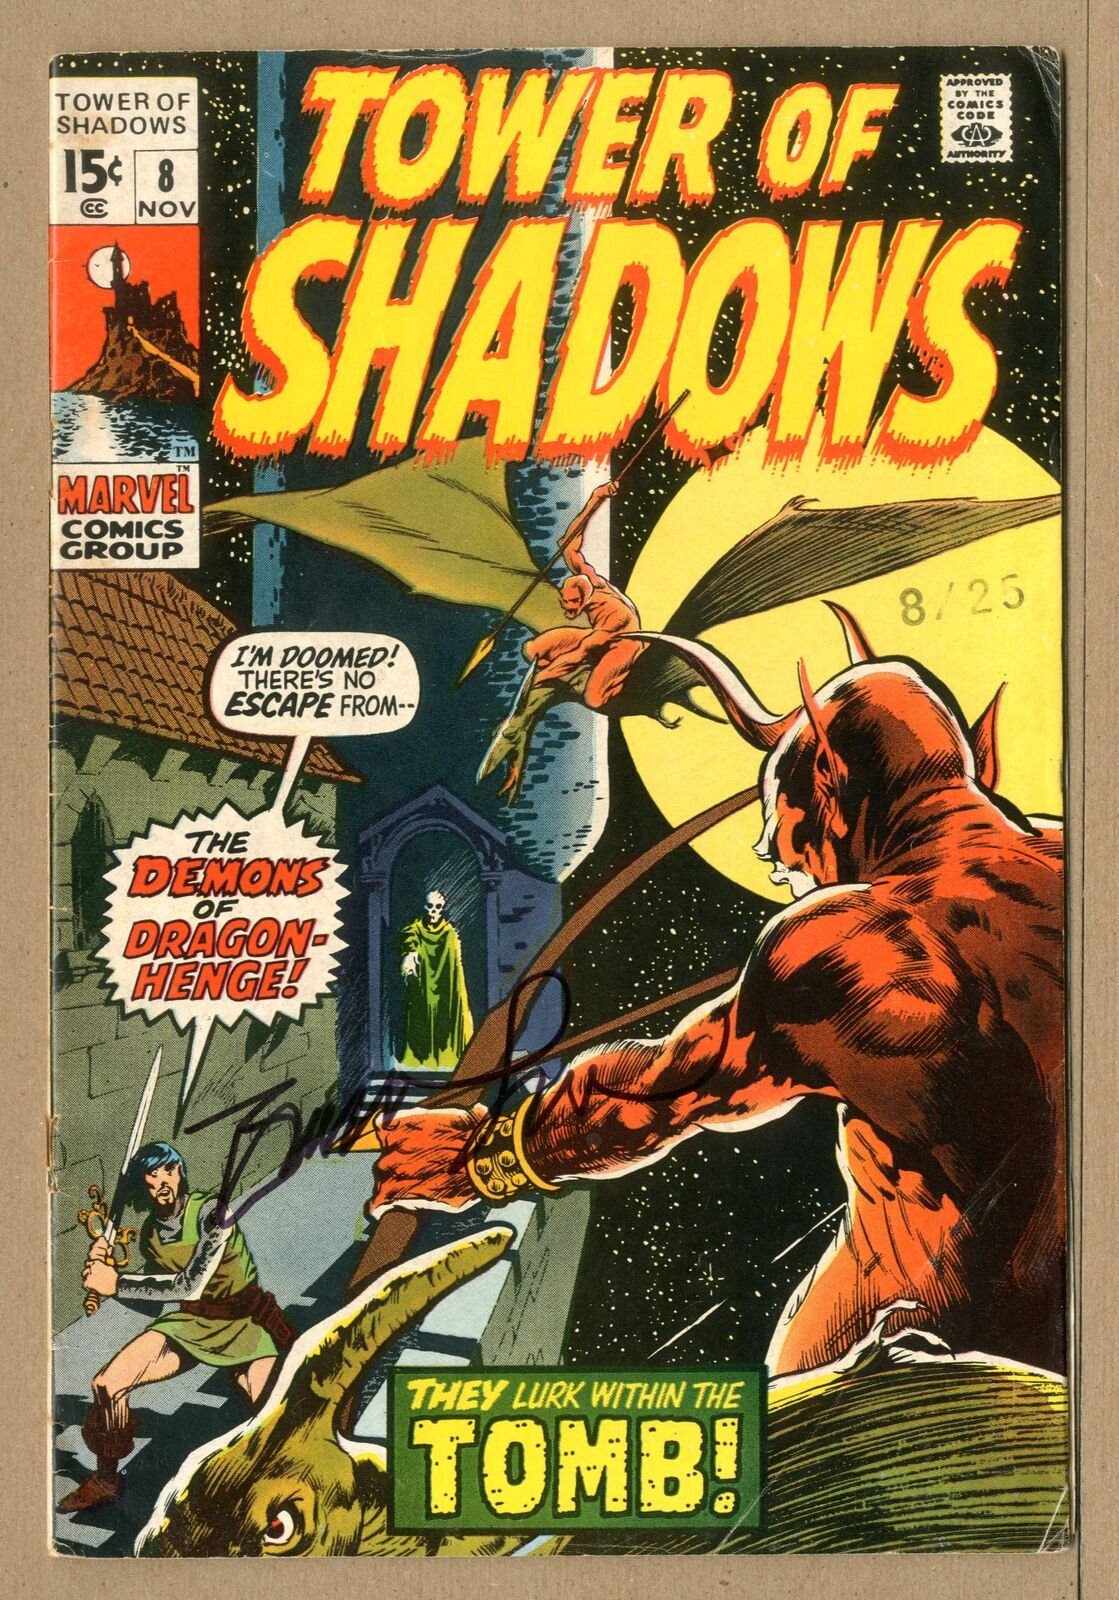 Tower of Shadows #8 VG- 3.5 Signed Bernie Wrightson